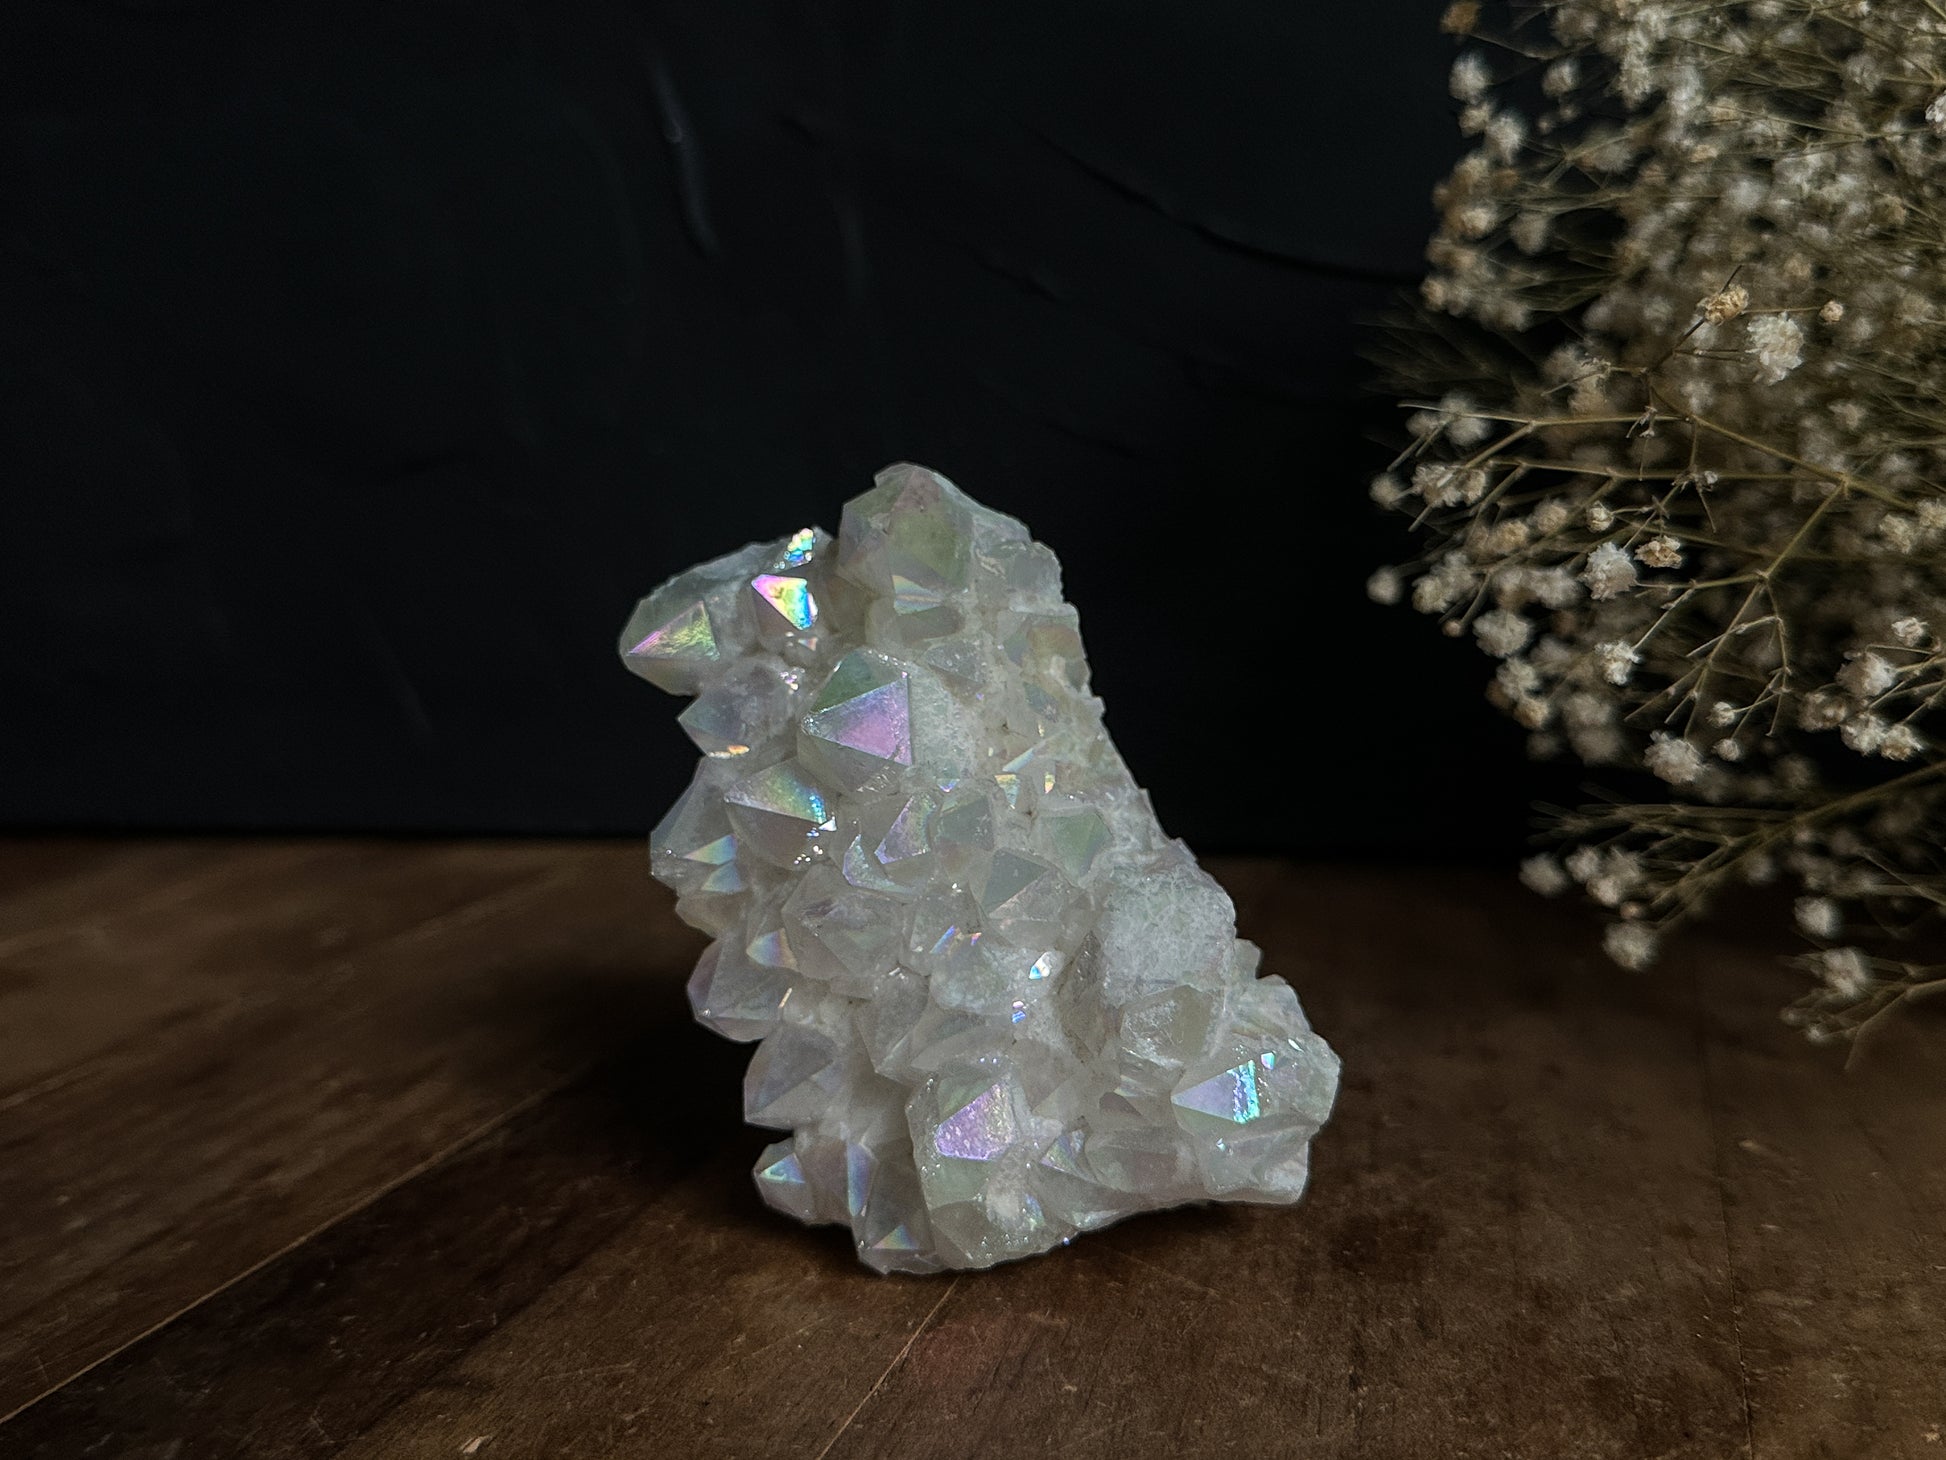 An exquisite Angel Aura Quartz Cluster, intricately formed and reflecting the divine beauty of the cosmos